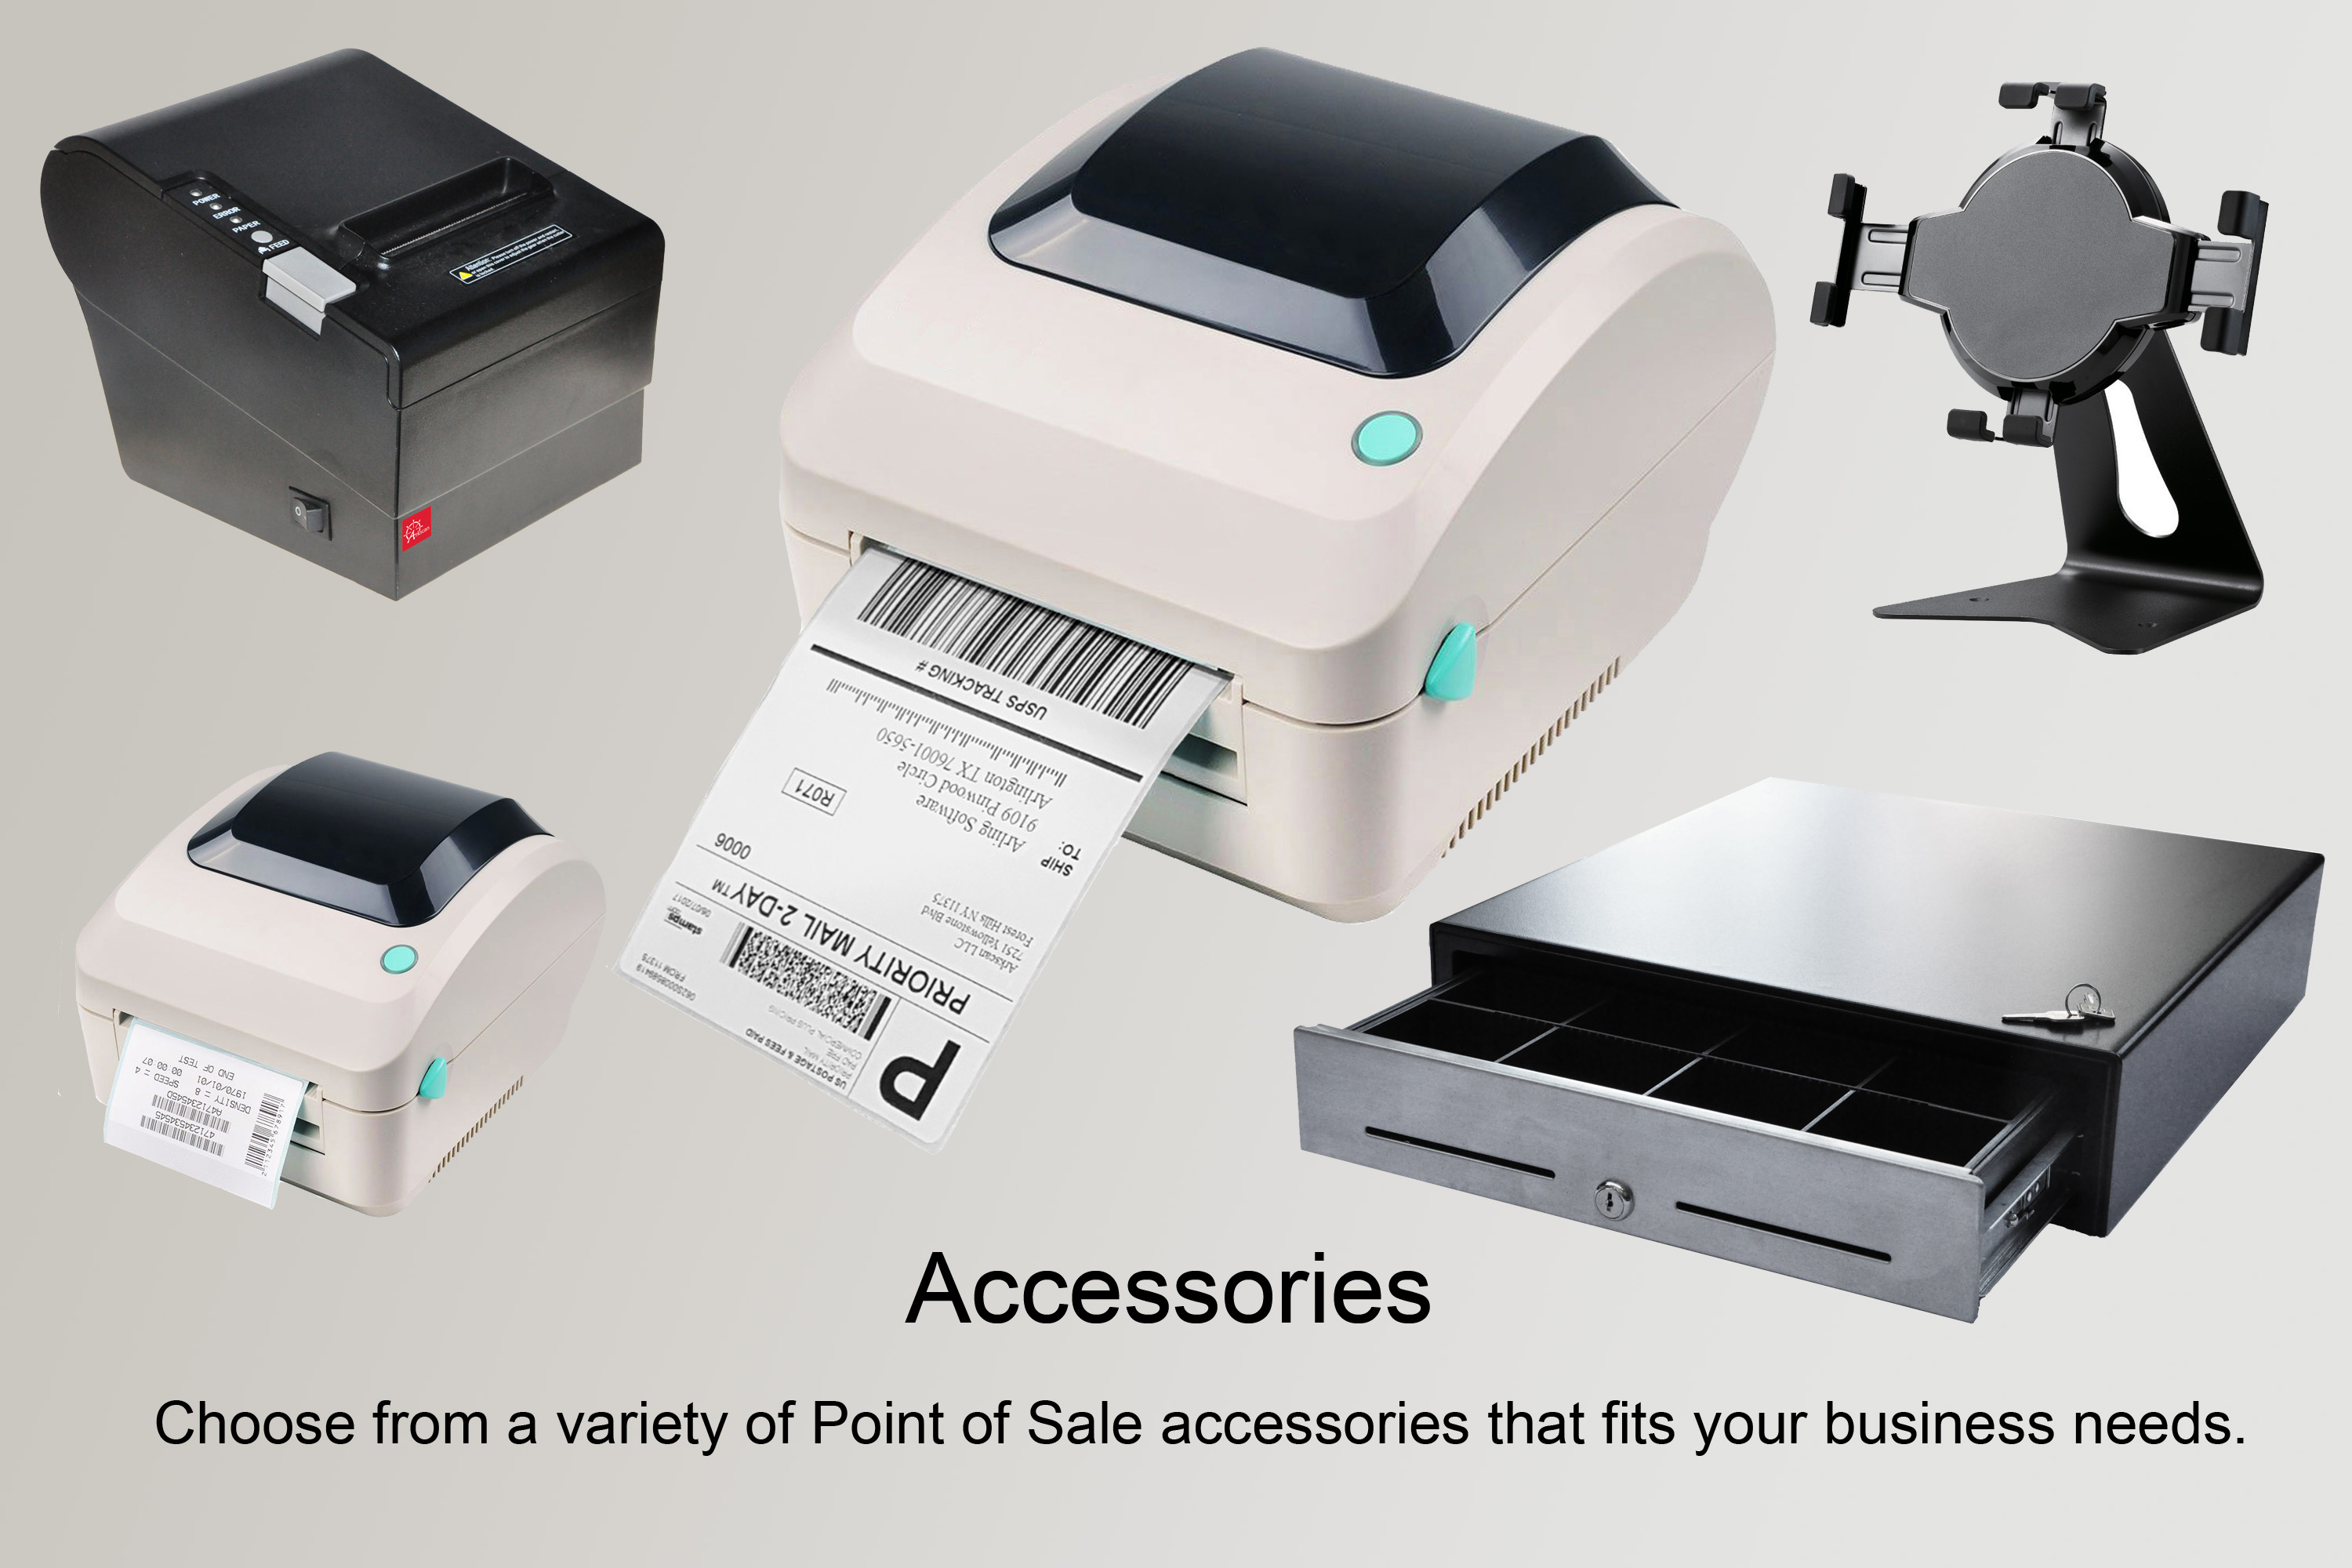 Variety Barcode Scanner that fits your business needs